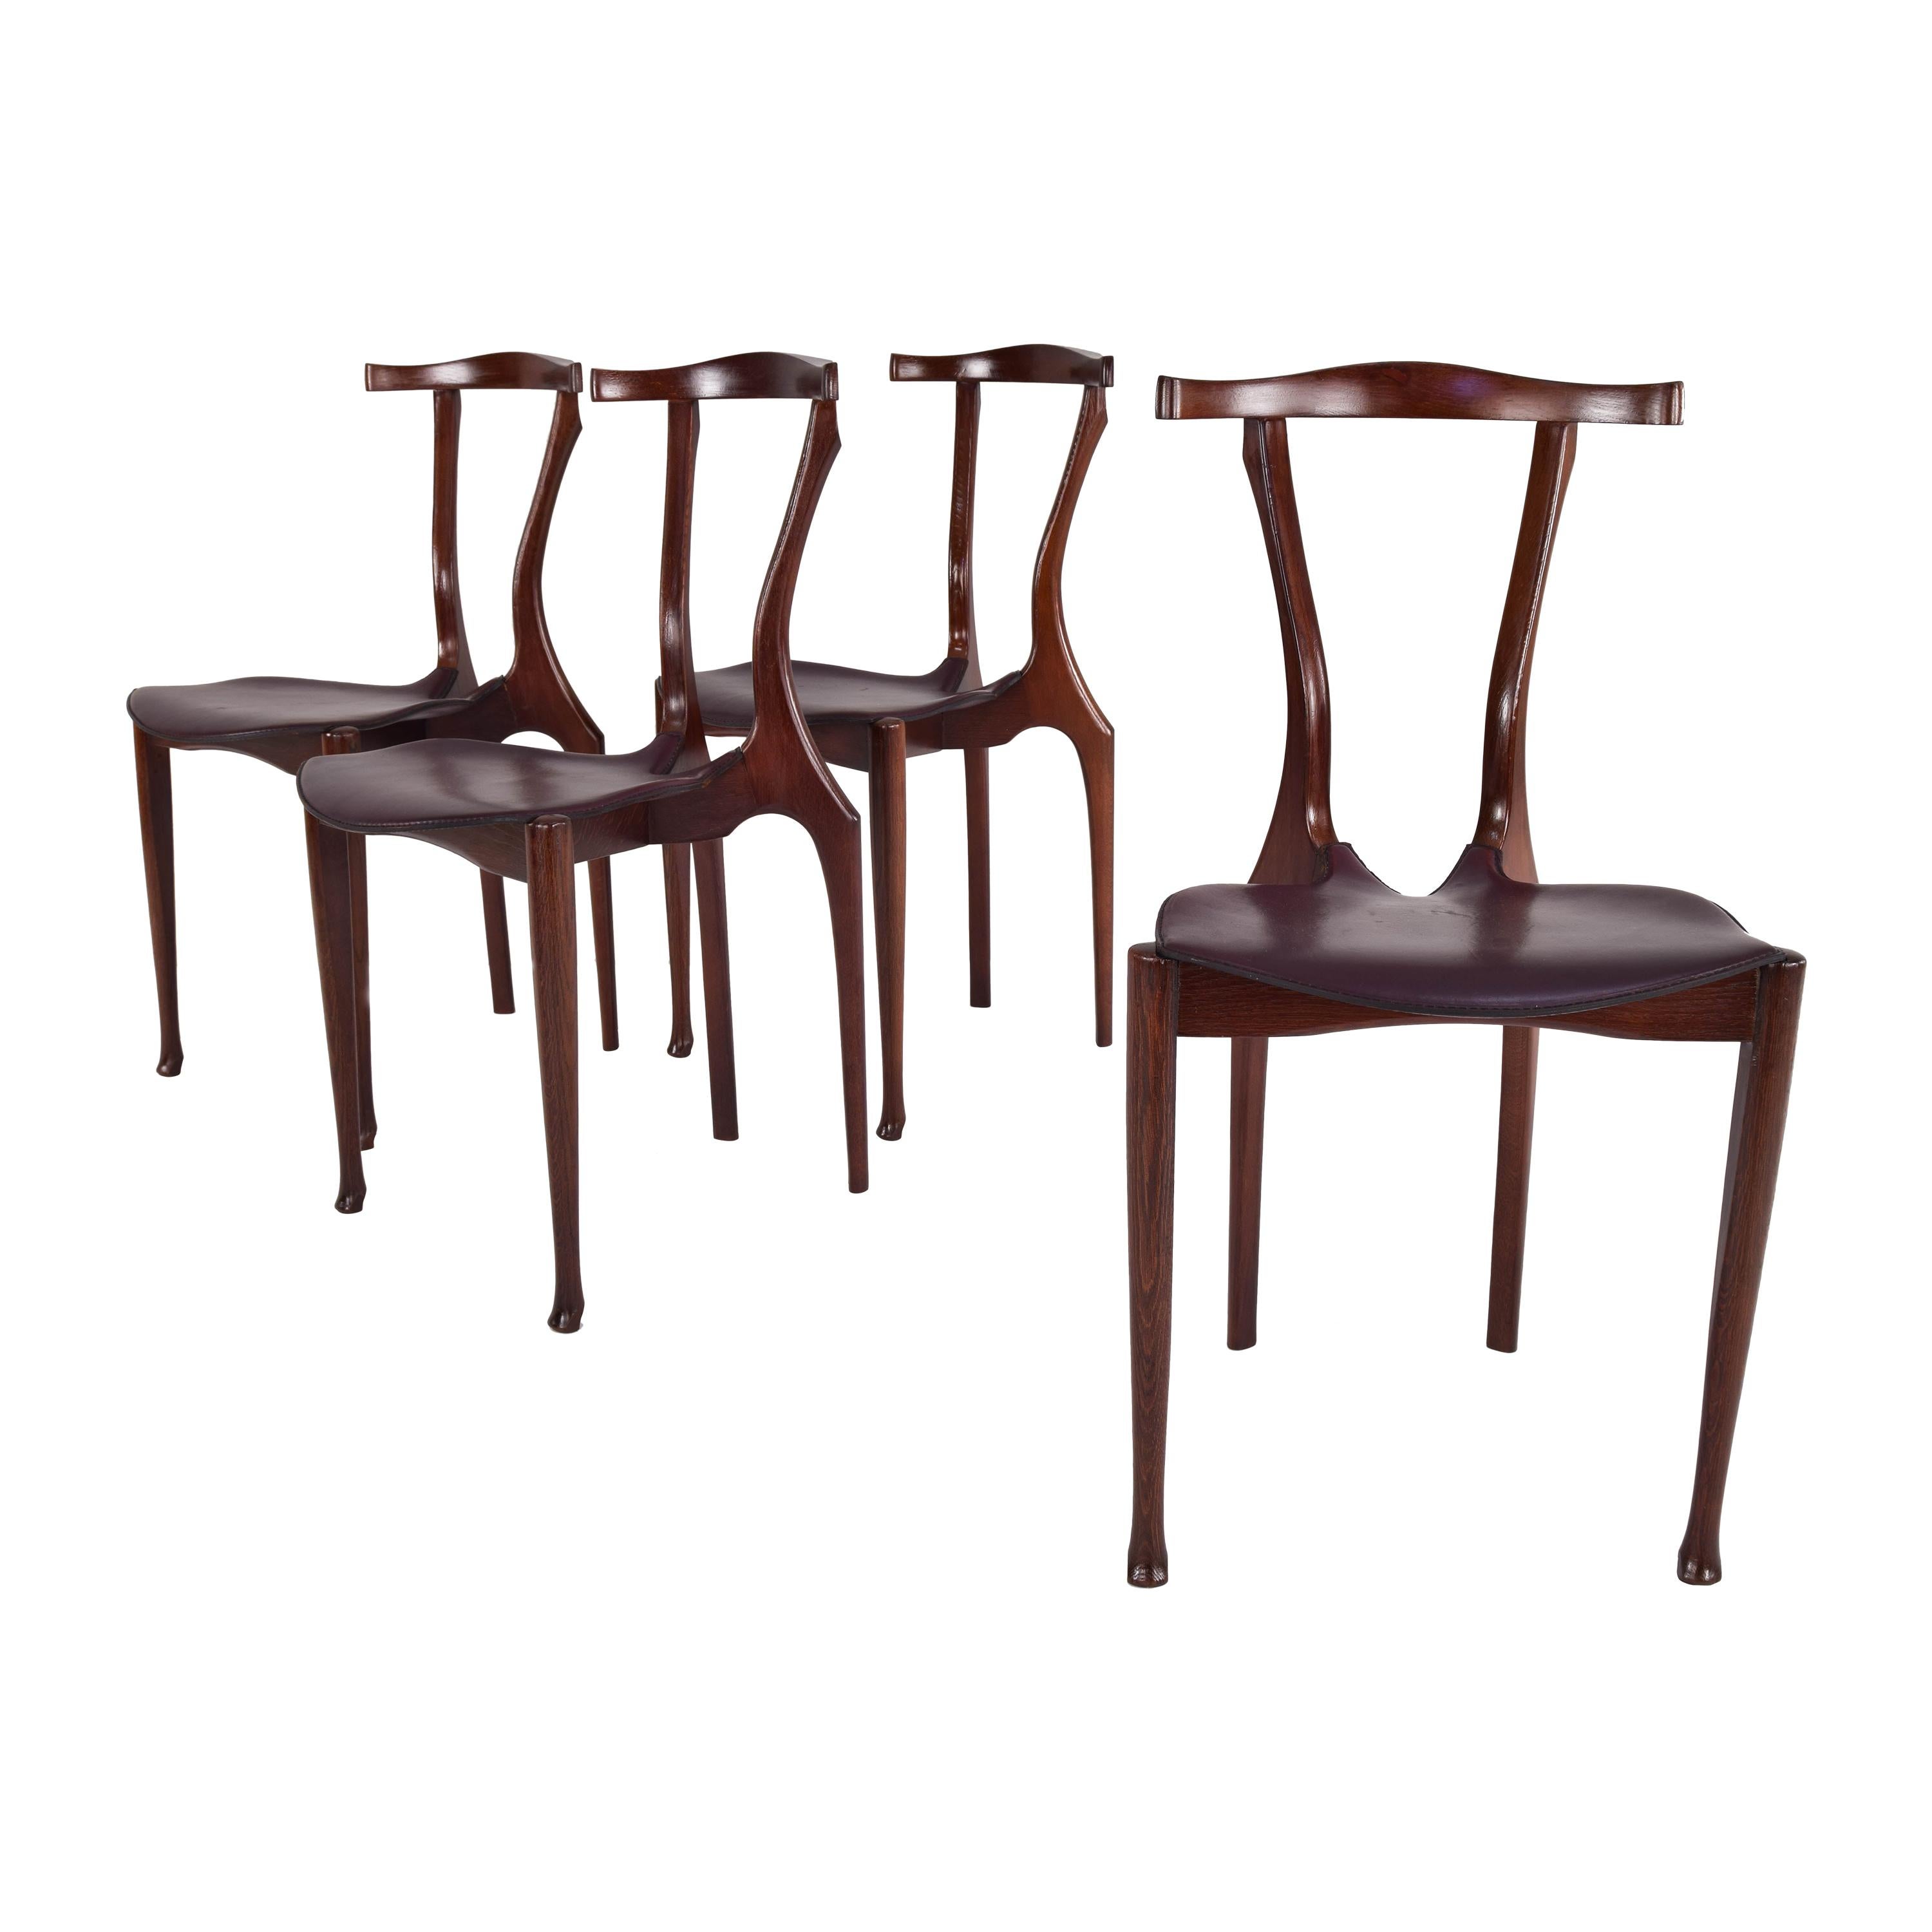 Set of Four First Edition Oscar Tusquets Gaulino Oak and Leather Chairs by Jané